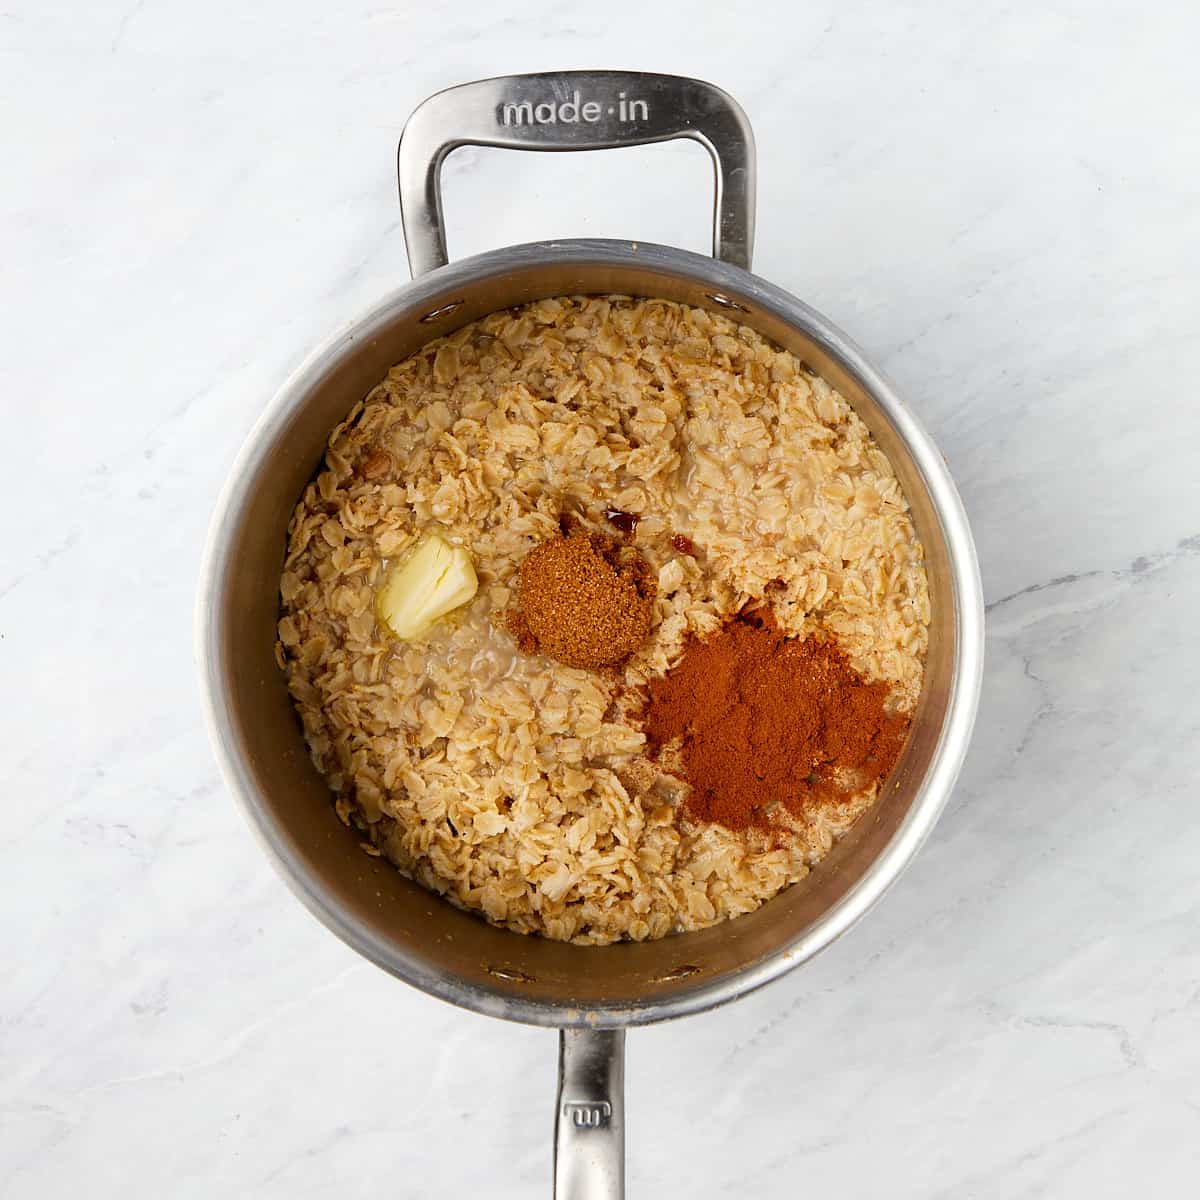 spices, brown sugar, and butter added to oatmeal cooking in saucepan